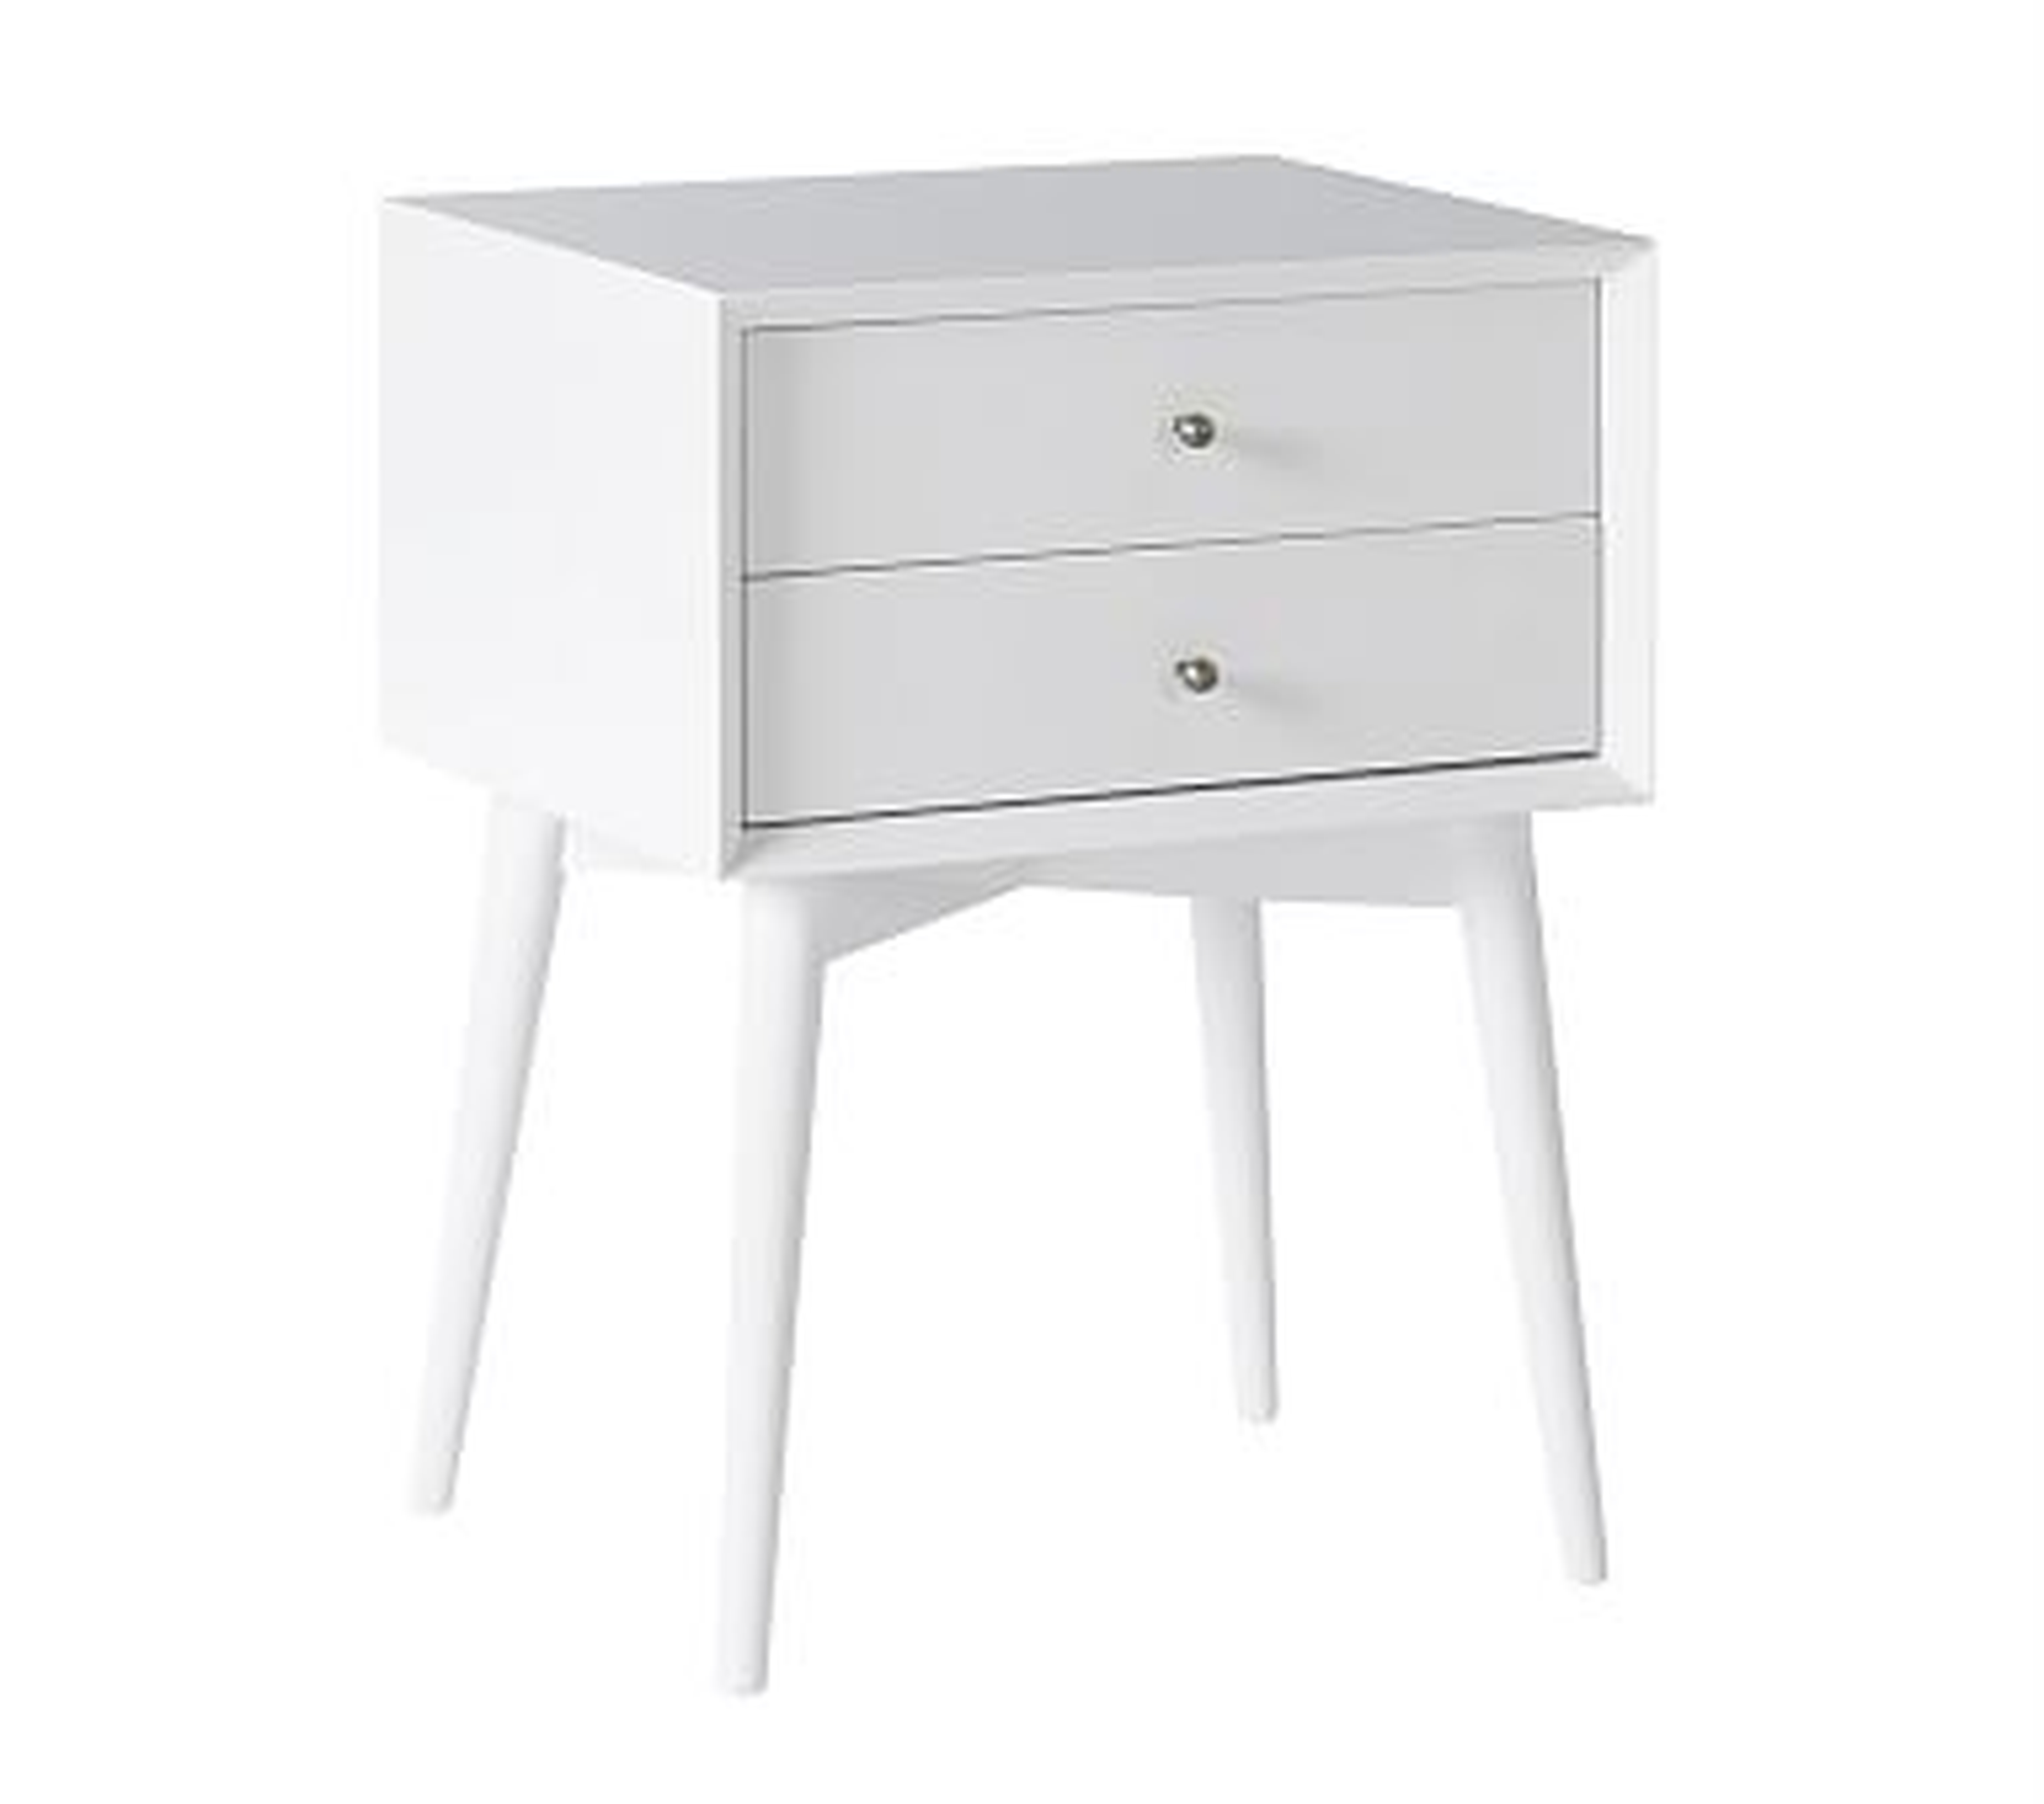 west elm x pbk Mid-Century Nightstand, White, In-Home Delivery - Pottery Barn Kids